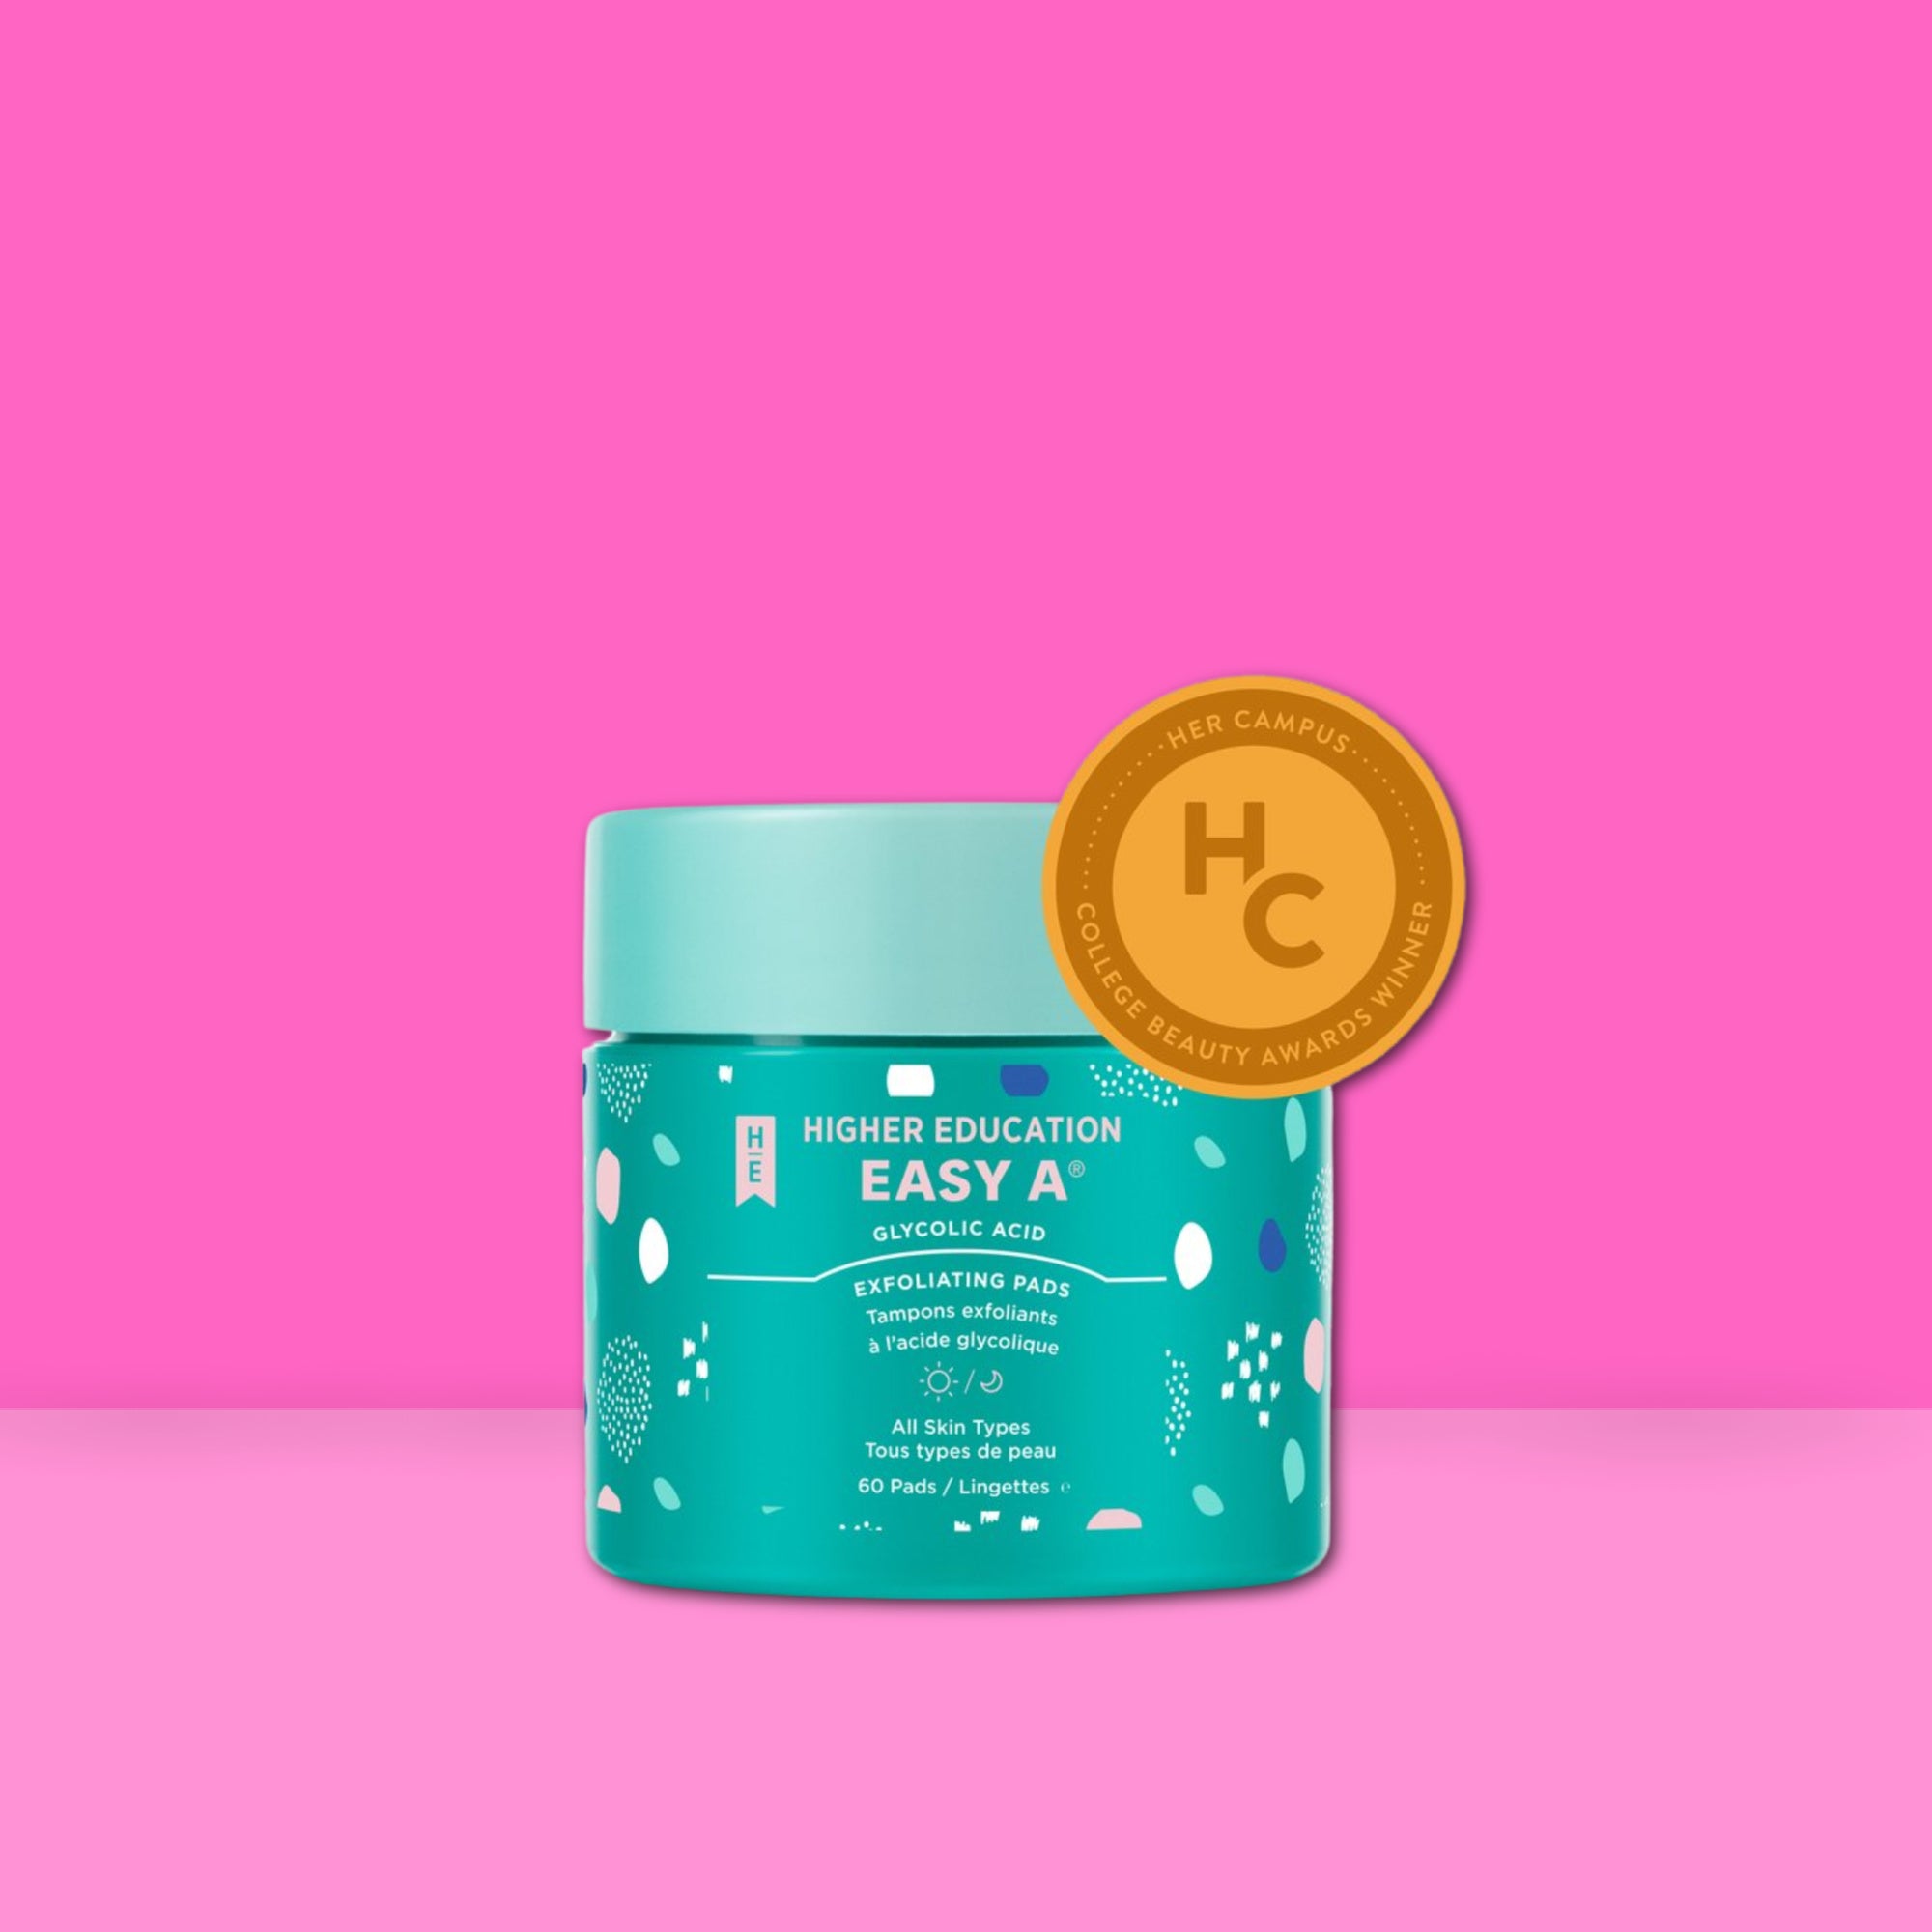 HIGHER EDUCATION - EASY A - GLYCOLIC ACID EXFOLIATING PADS